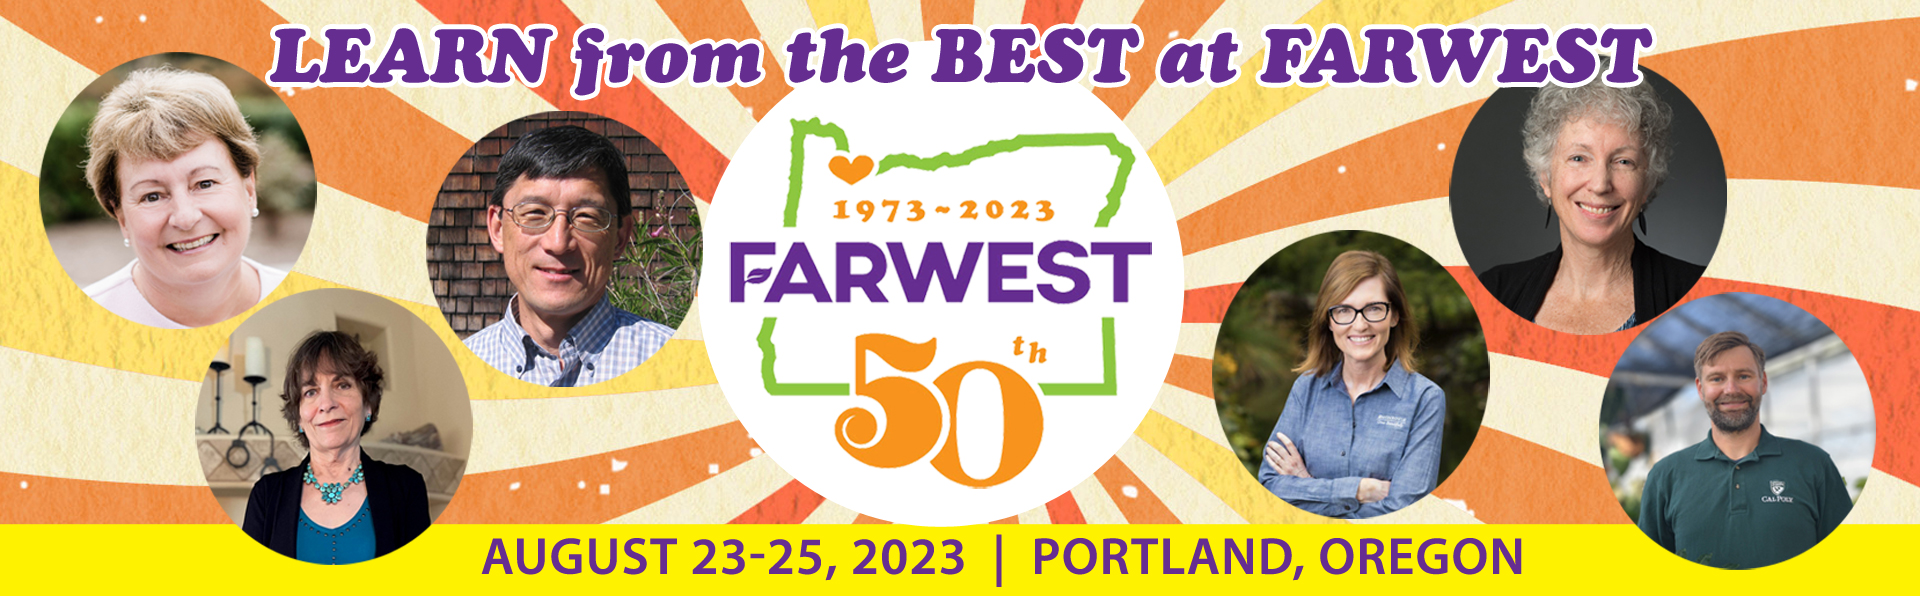 Farwest Show Portland, Oregon The Biggest Green Industry Trade Show